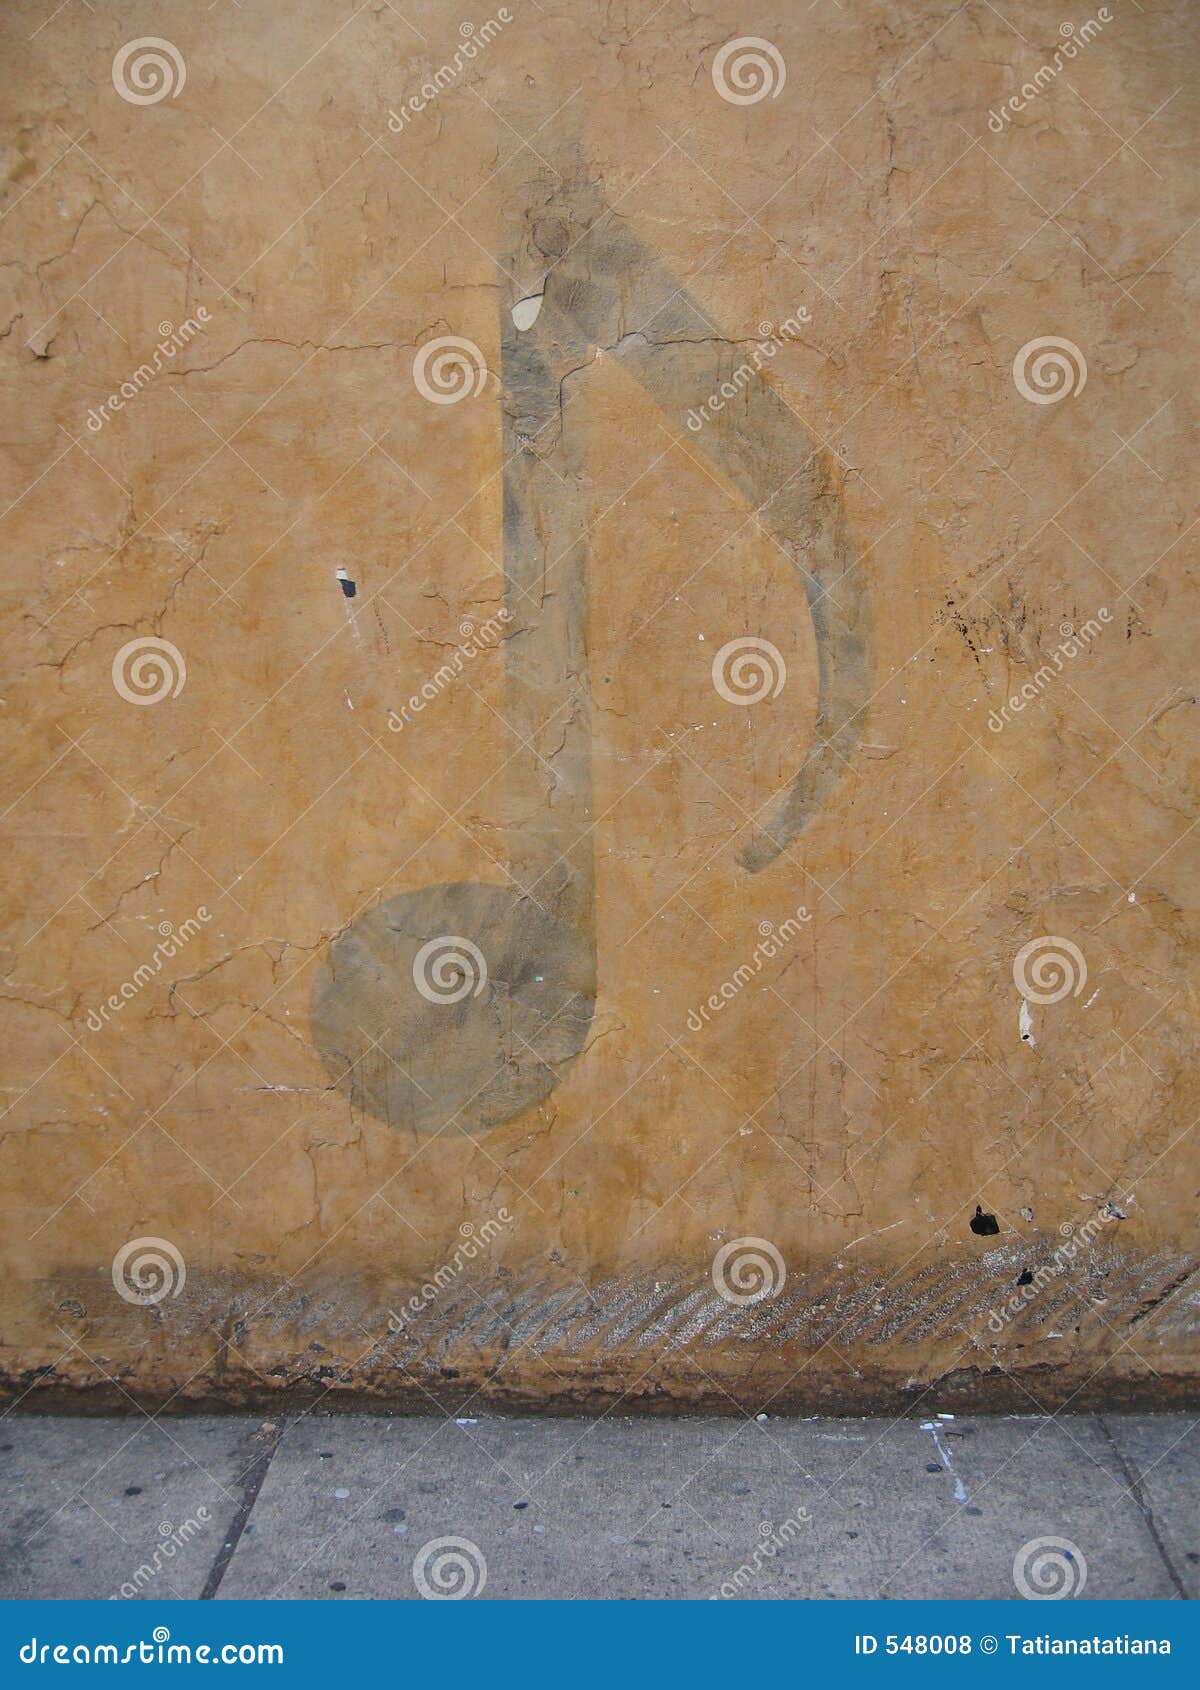 musical note on wall